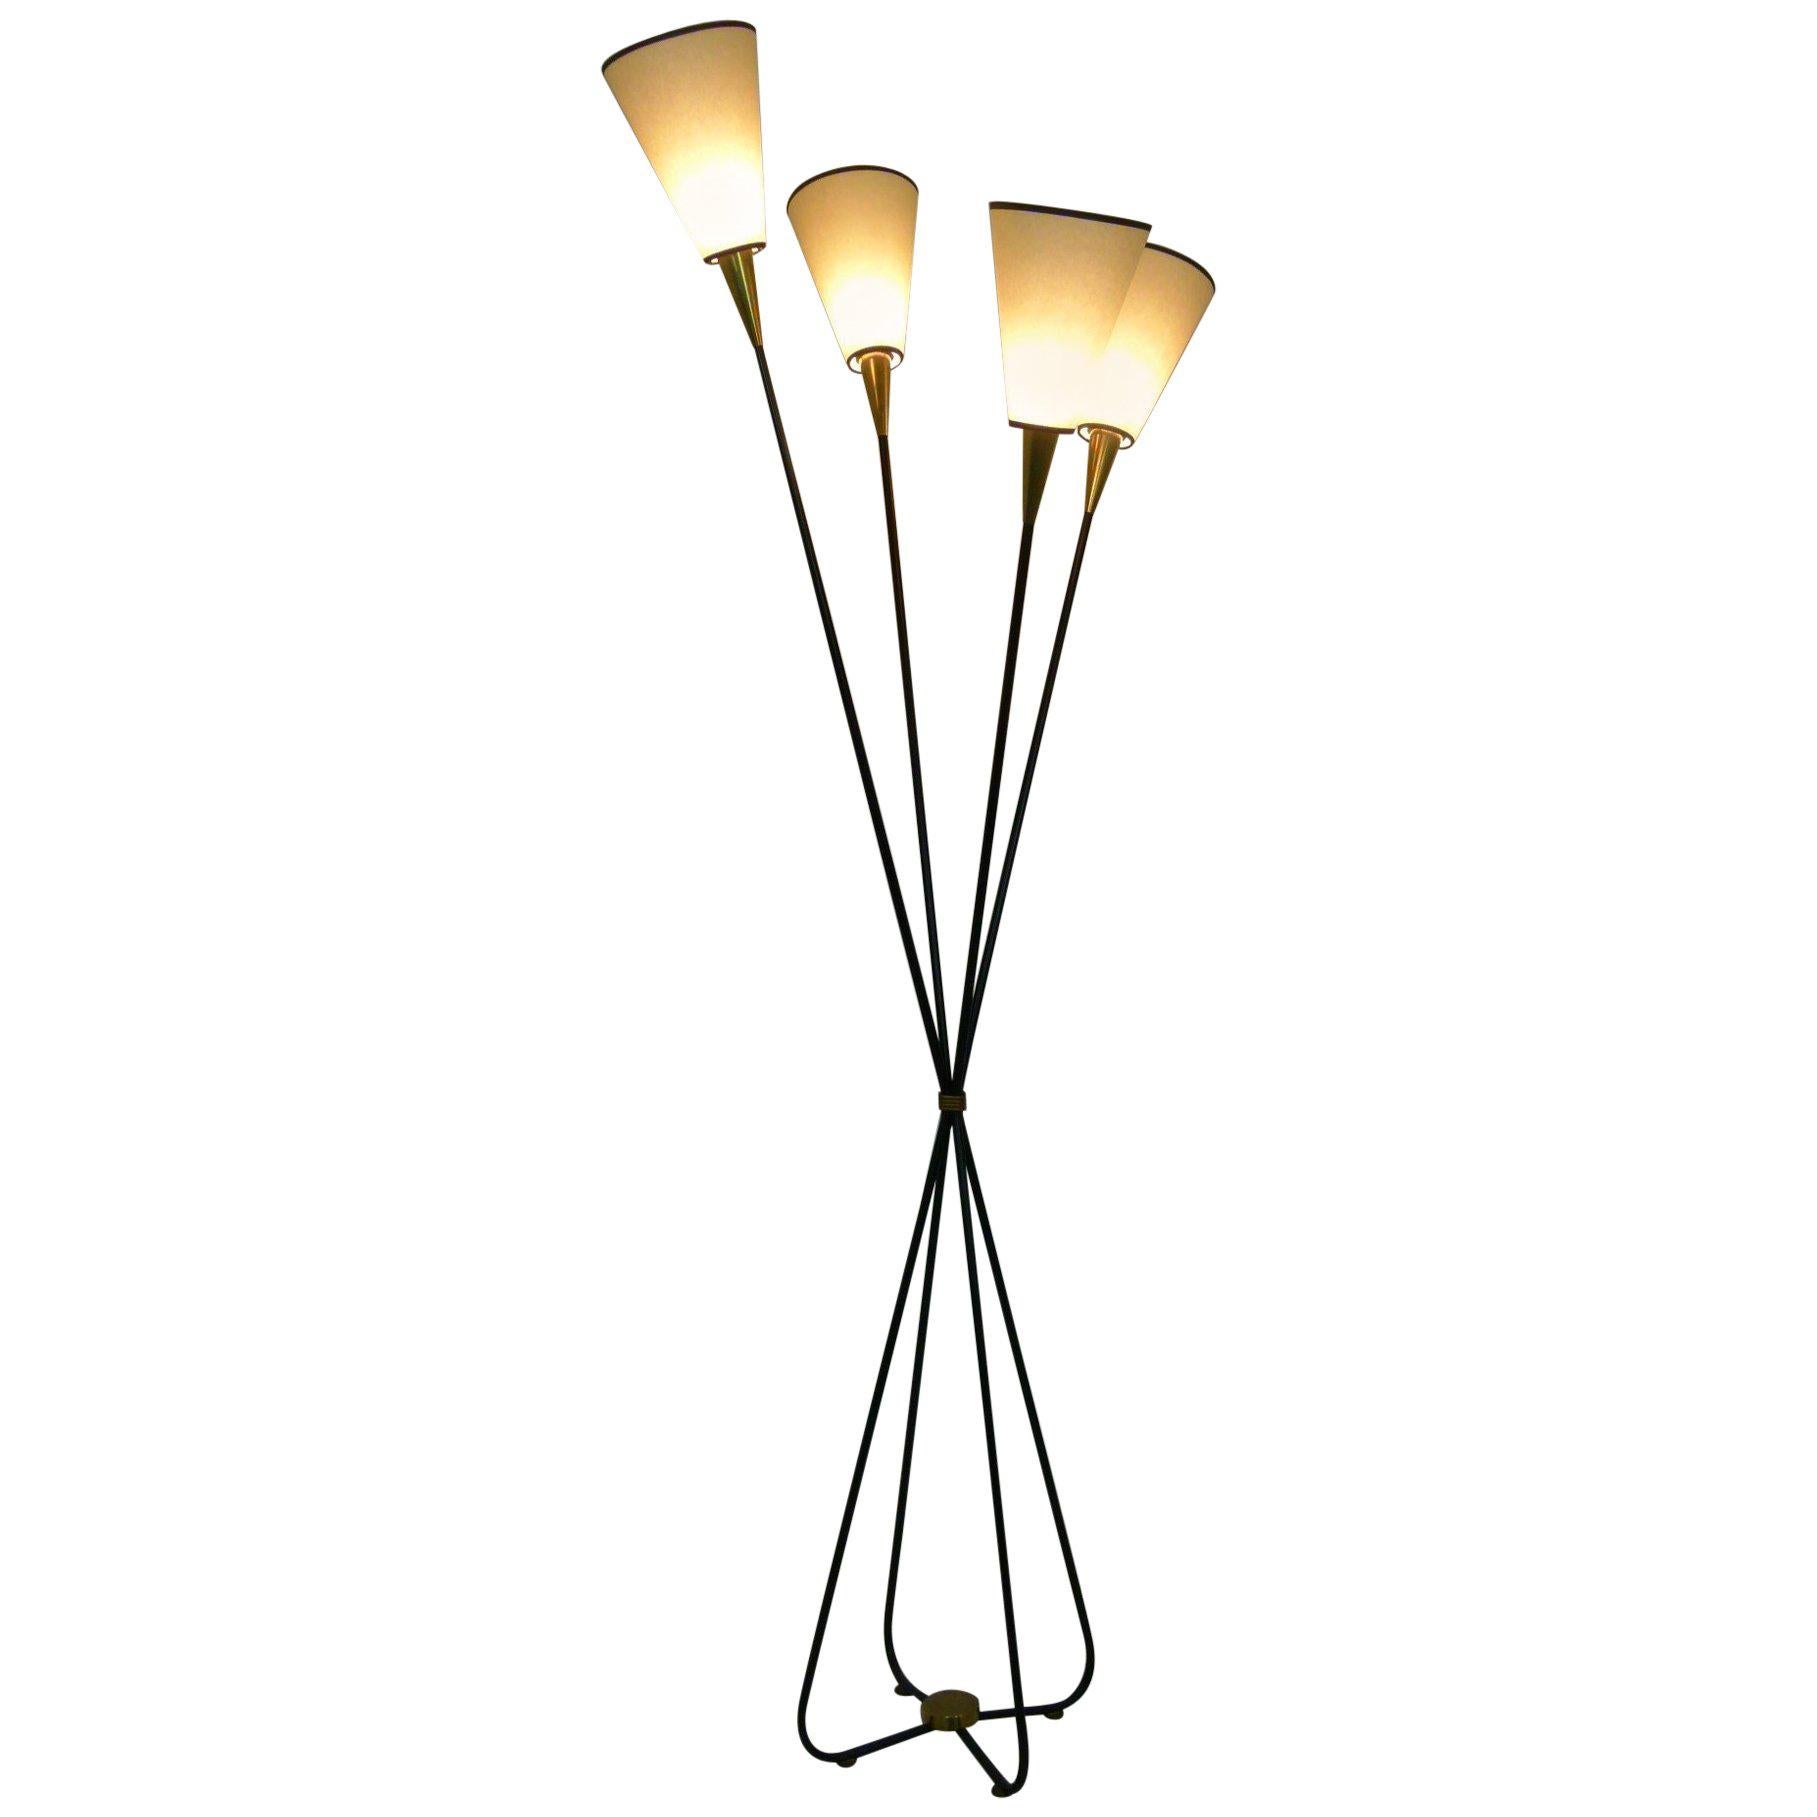 Pair of 1950s Free Shape Floor Lamp with Four Lighted Arms